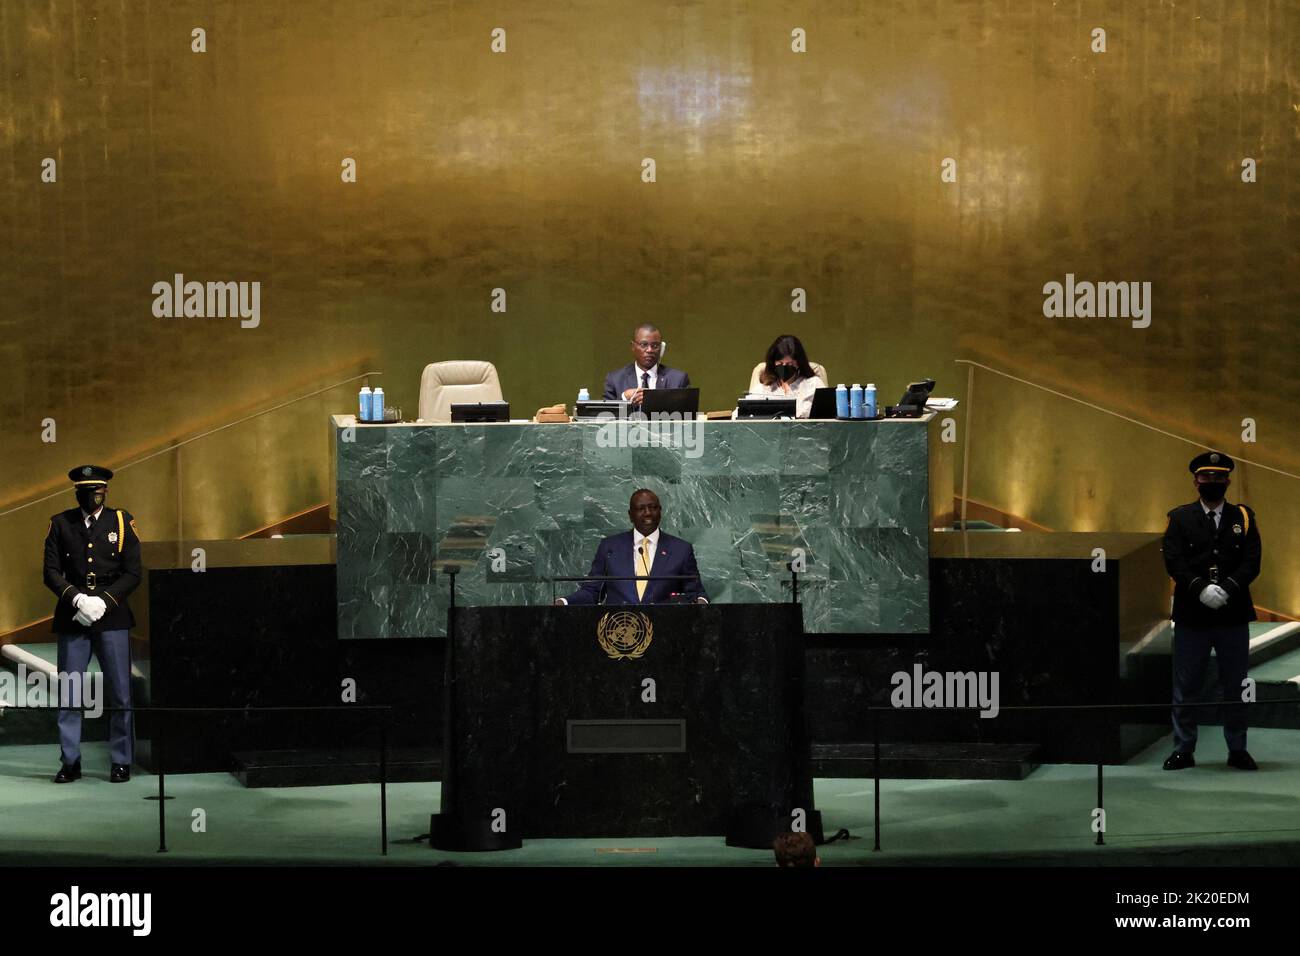 Kenya's President William Samoei Ruto addresses the 77th Session of the United Nations General Assembly at U.N. Headquarters in New York City, U.S., September 21, 2022. REUTERS/Brendan McDermid Stock Photo